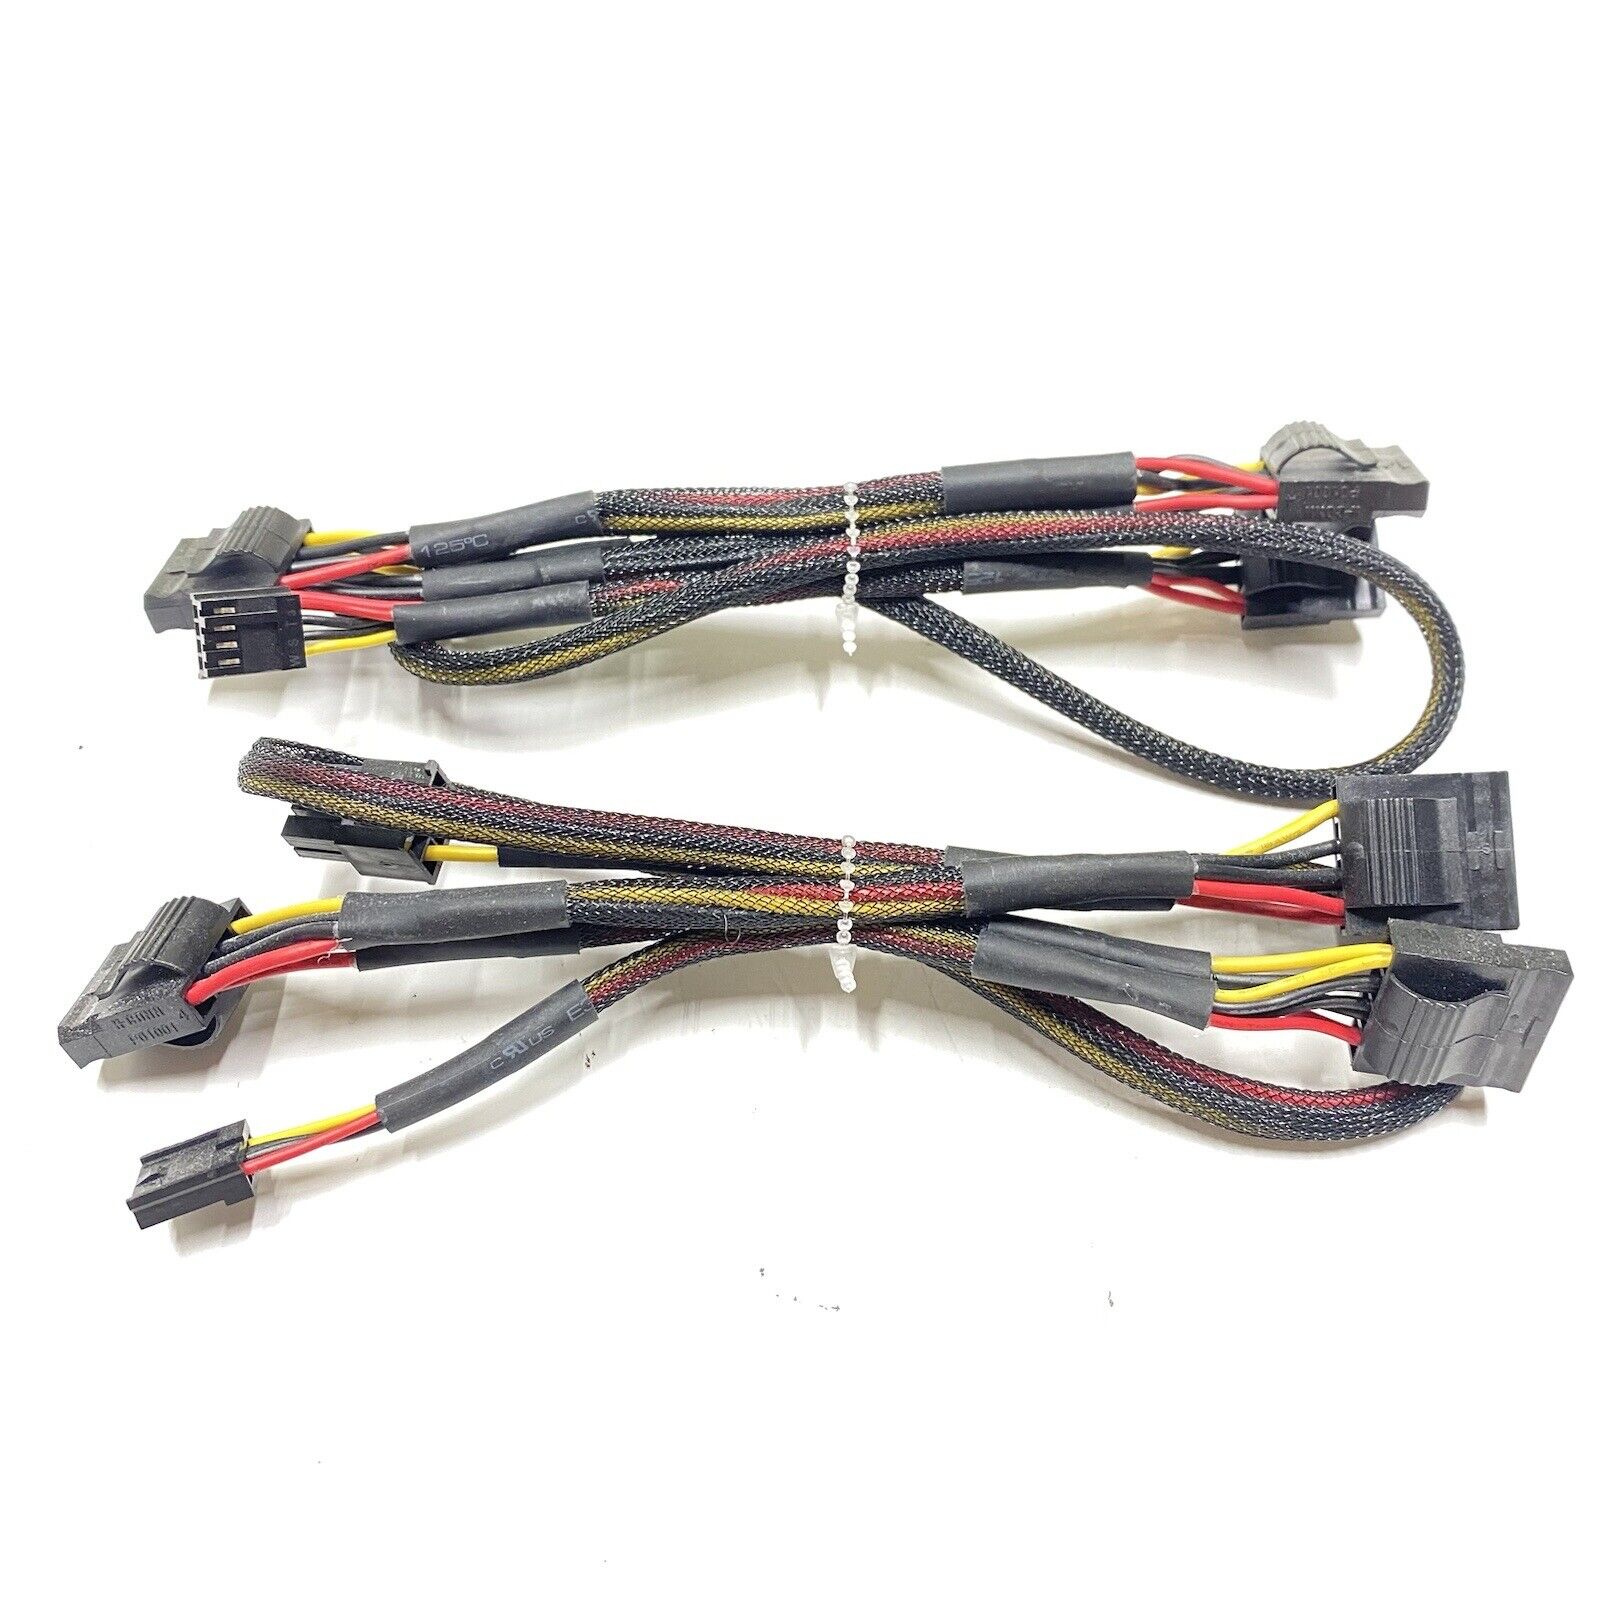 2 QTY 6 Pin to 3x Molex 4 Pin IDE Driver Power Supply Modular Cable 39”